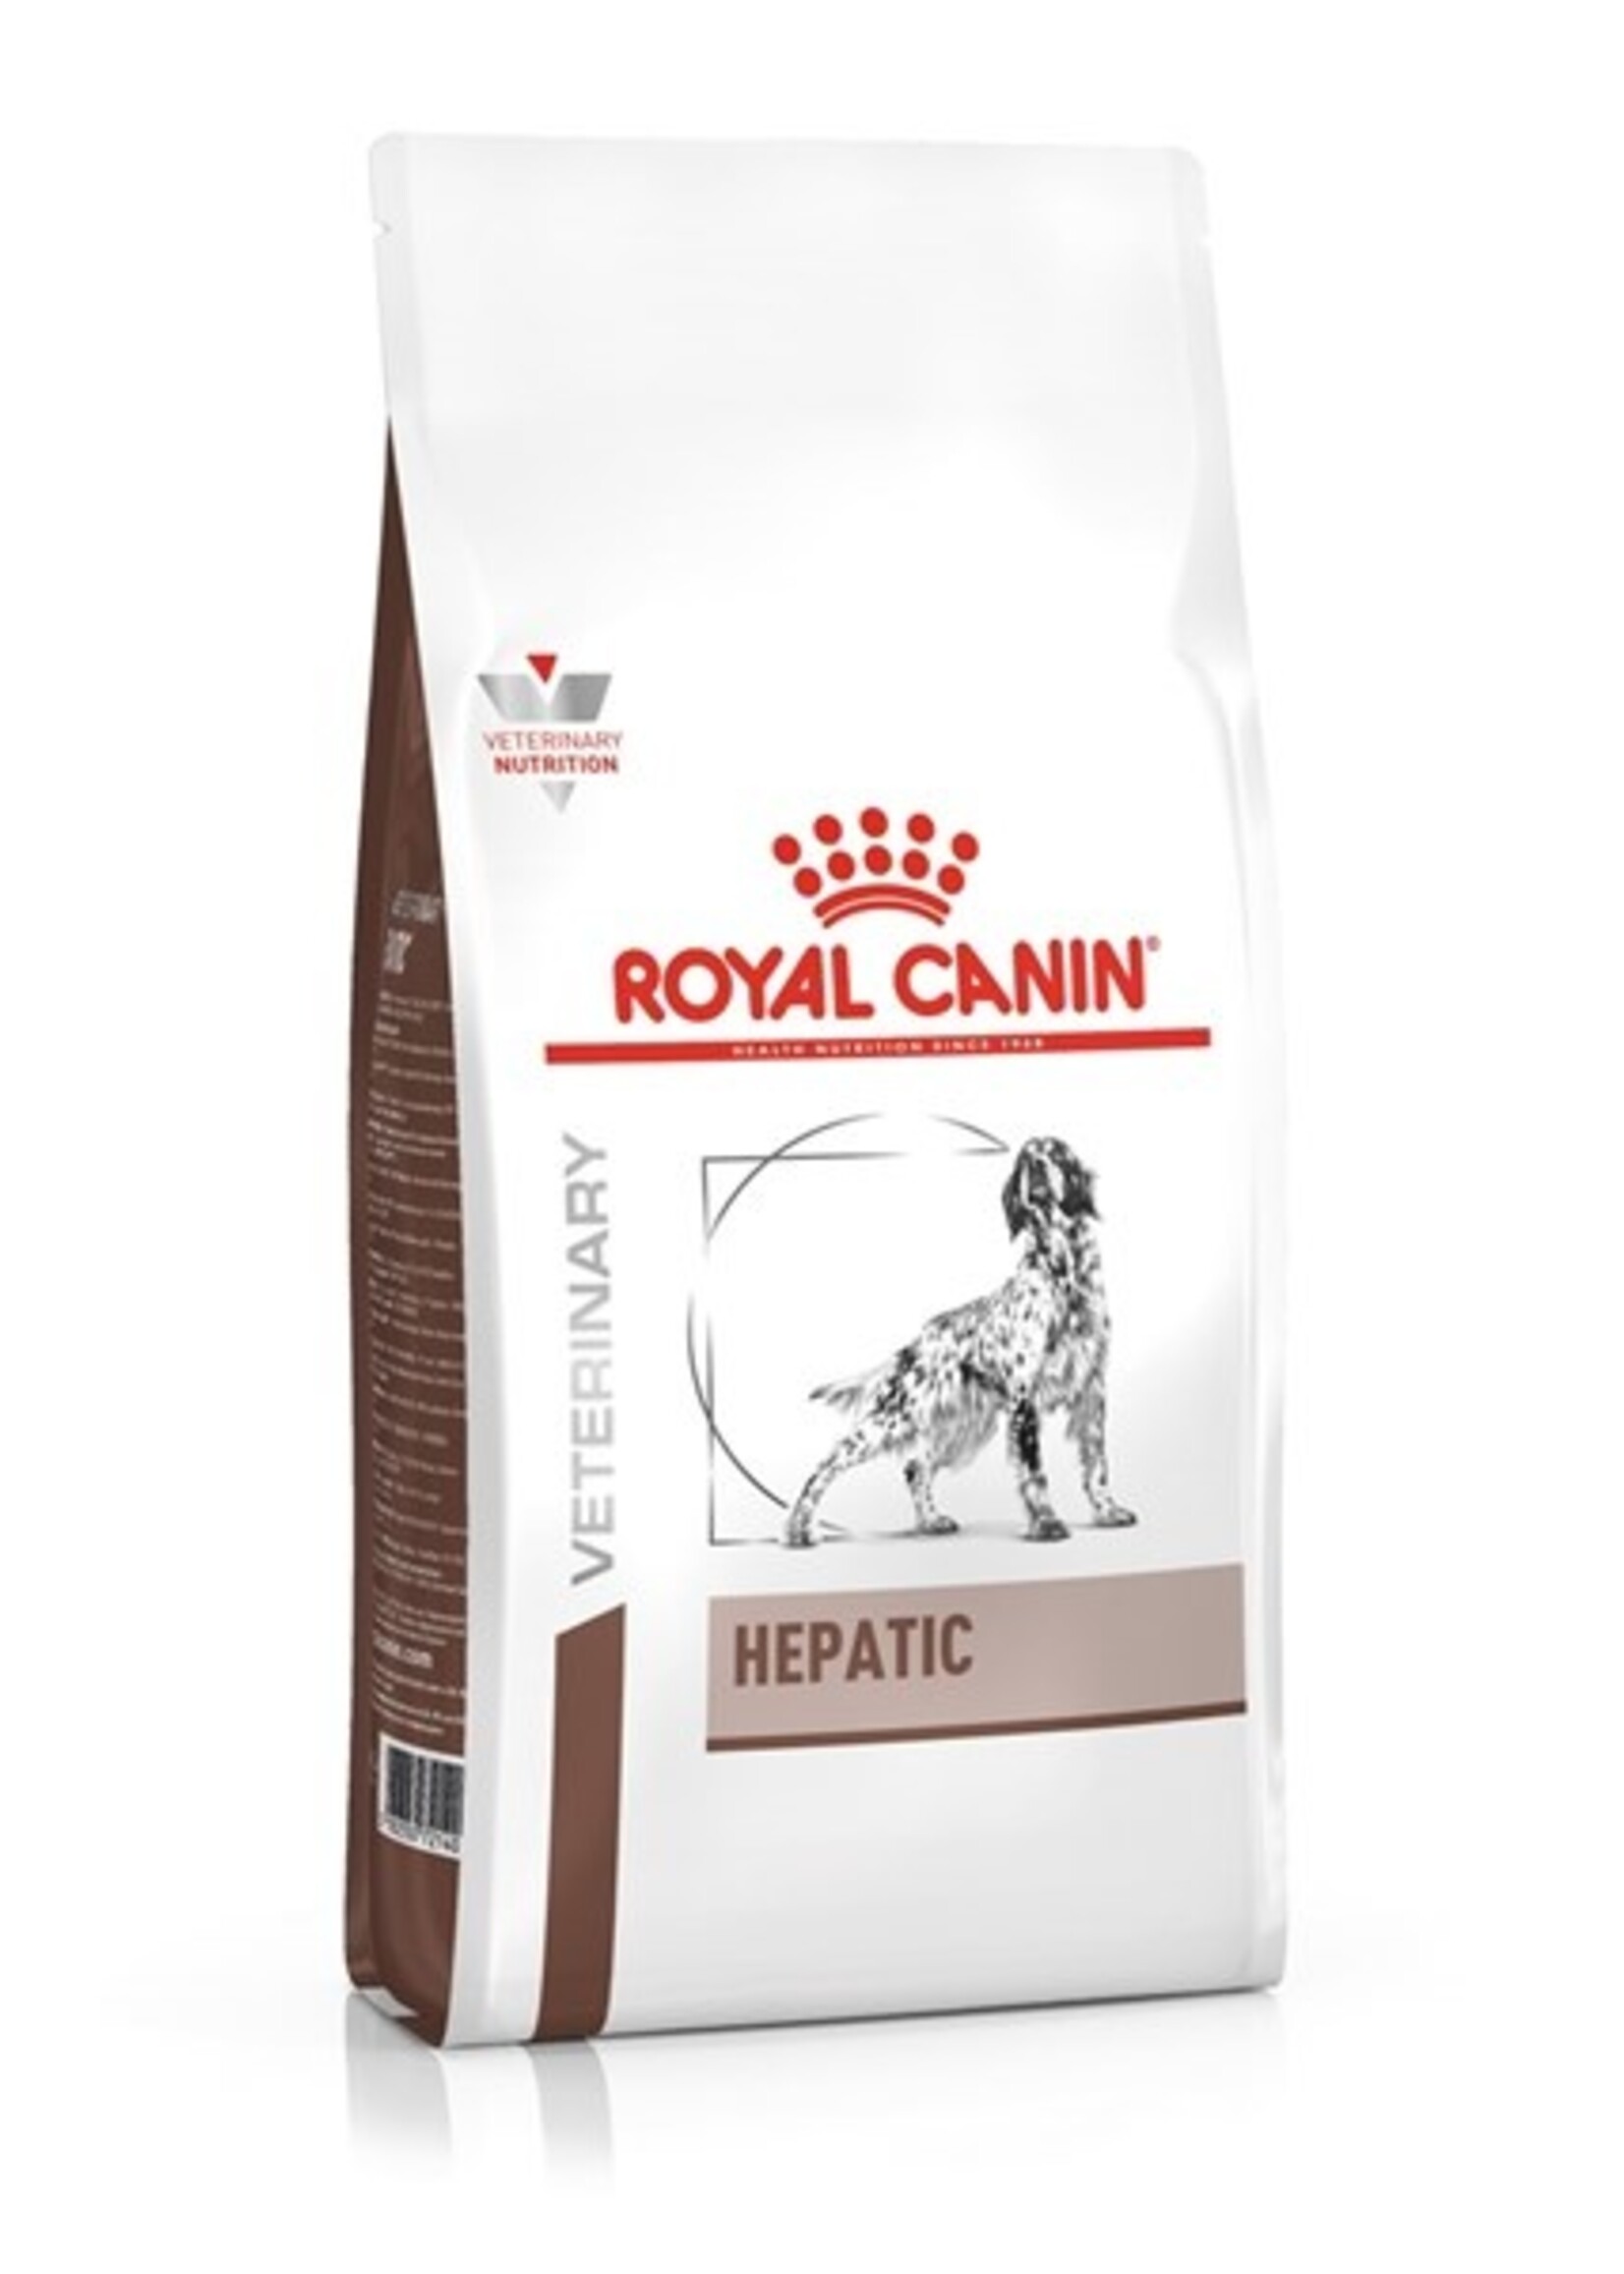 Royal Canin Royal Canin Vdiet Hepatic Hond 6kg